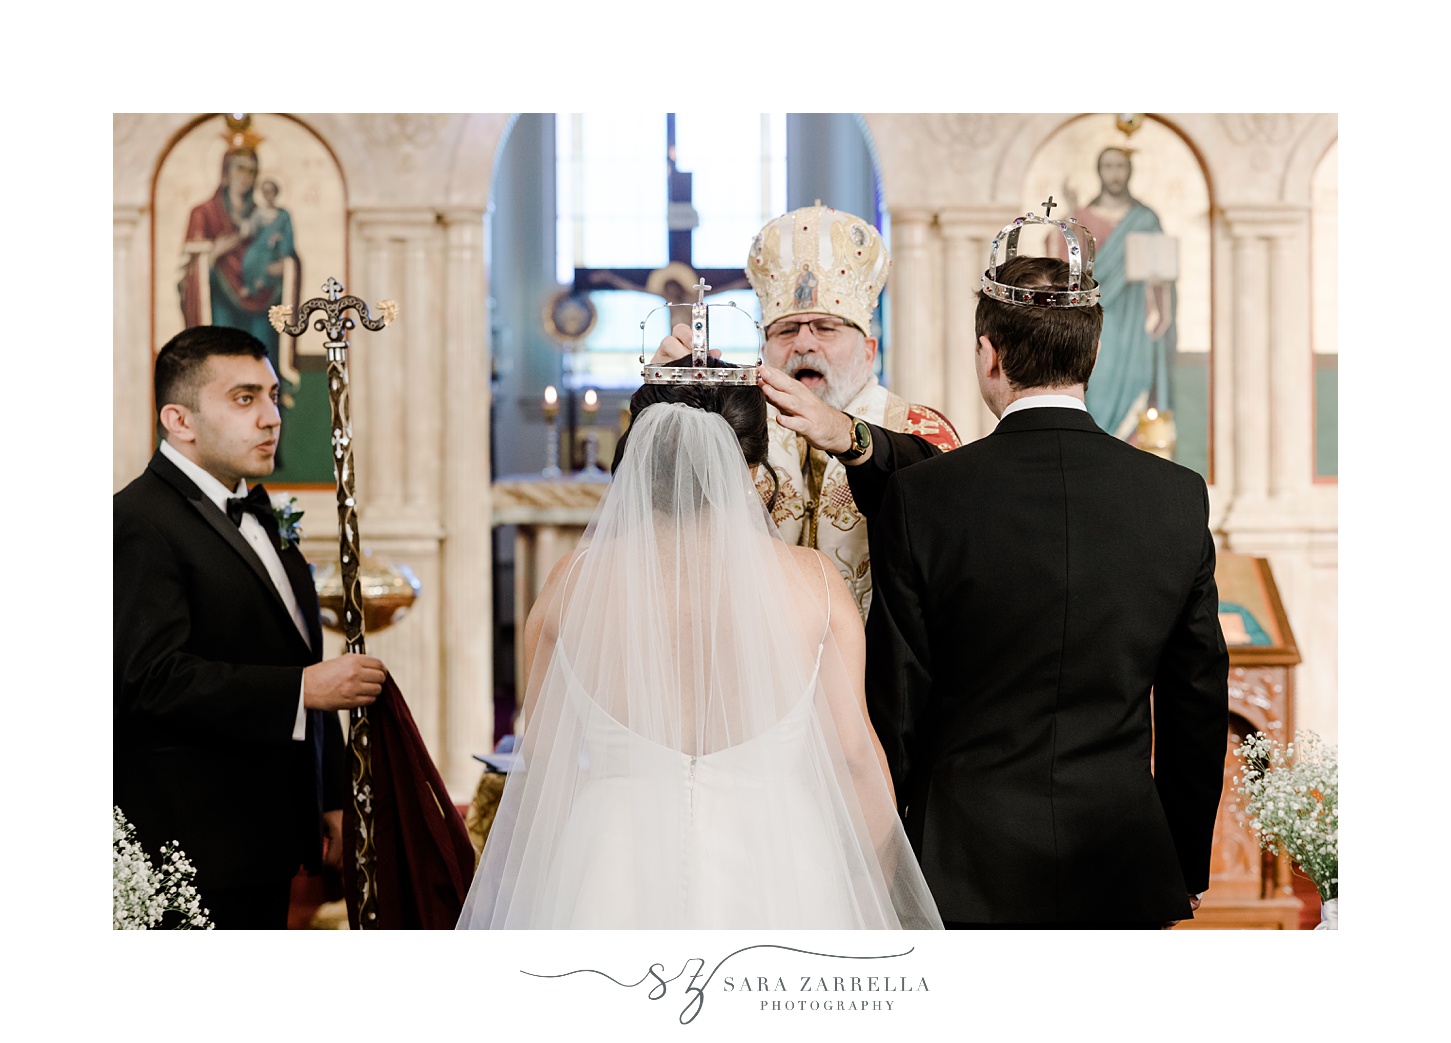 father puts crown on bride's head during traditional Greek Orthodox ceremony inside Saint Mary Antiochian church